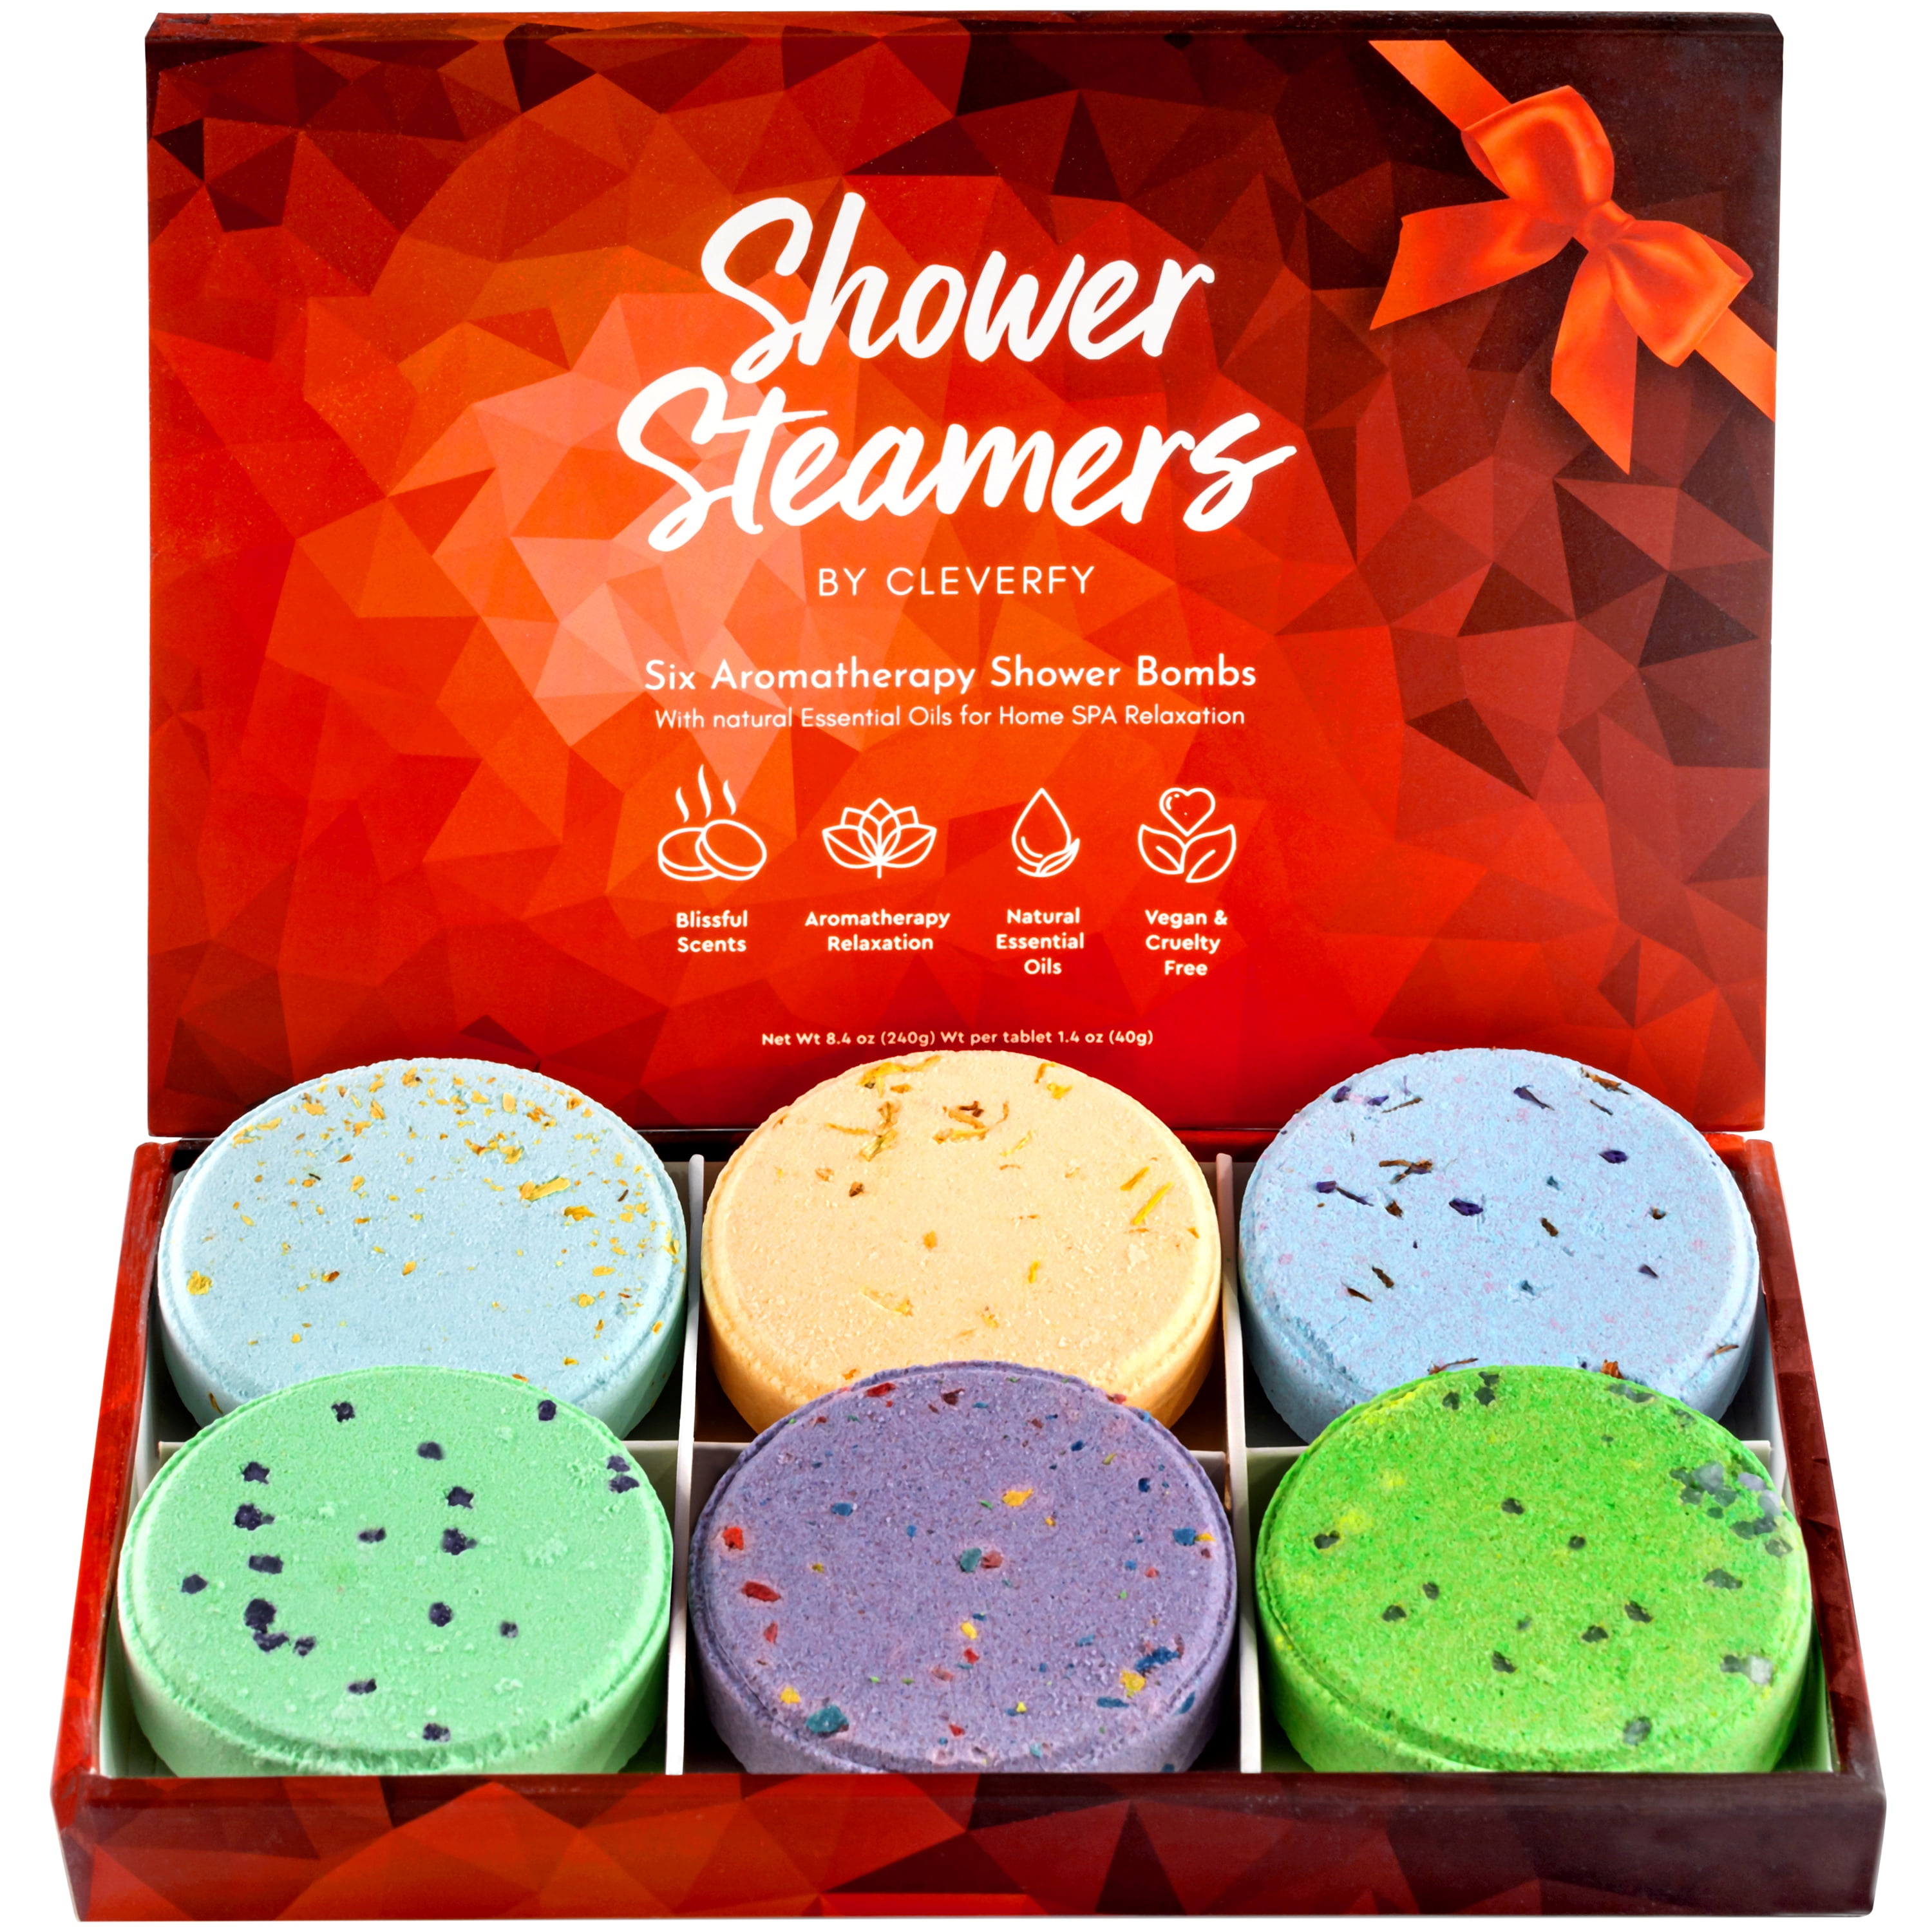 SEONNIX Shower Steamers Aromatherapy, 12-Pack Bath Bombs Shower Tablets  Gift Set, Self Care & SPA Relaxation, Stocking Stuffers Christmas Gifts for